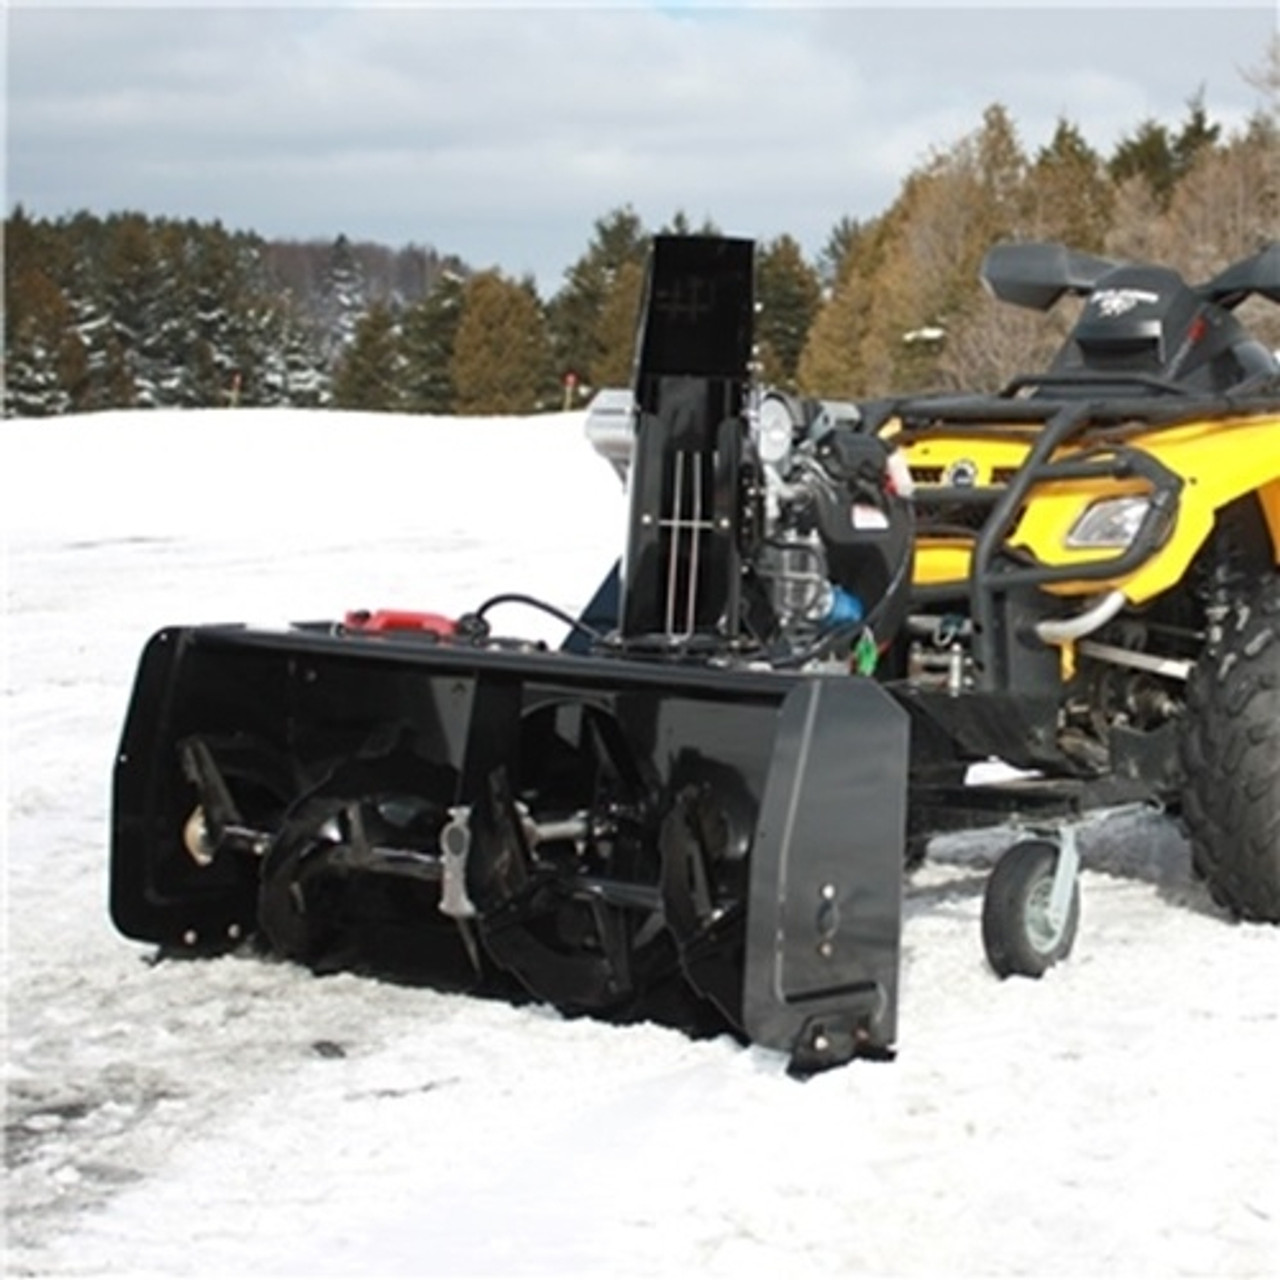 A front-oblique image of a Polaris Sportsman Snowblower by Bercomac, installed on an ATV and parked on snowy terrain.